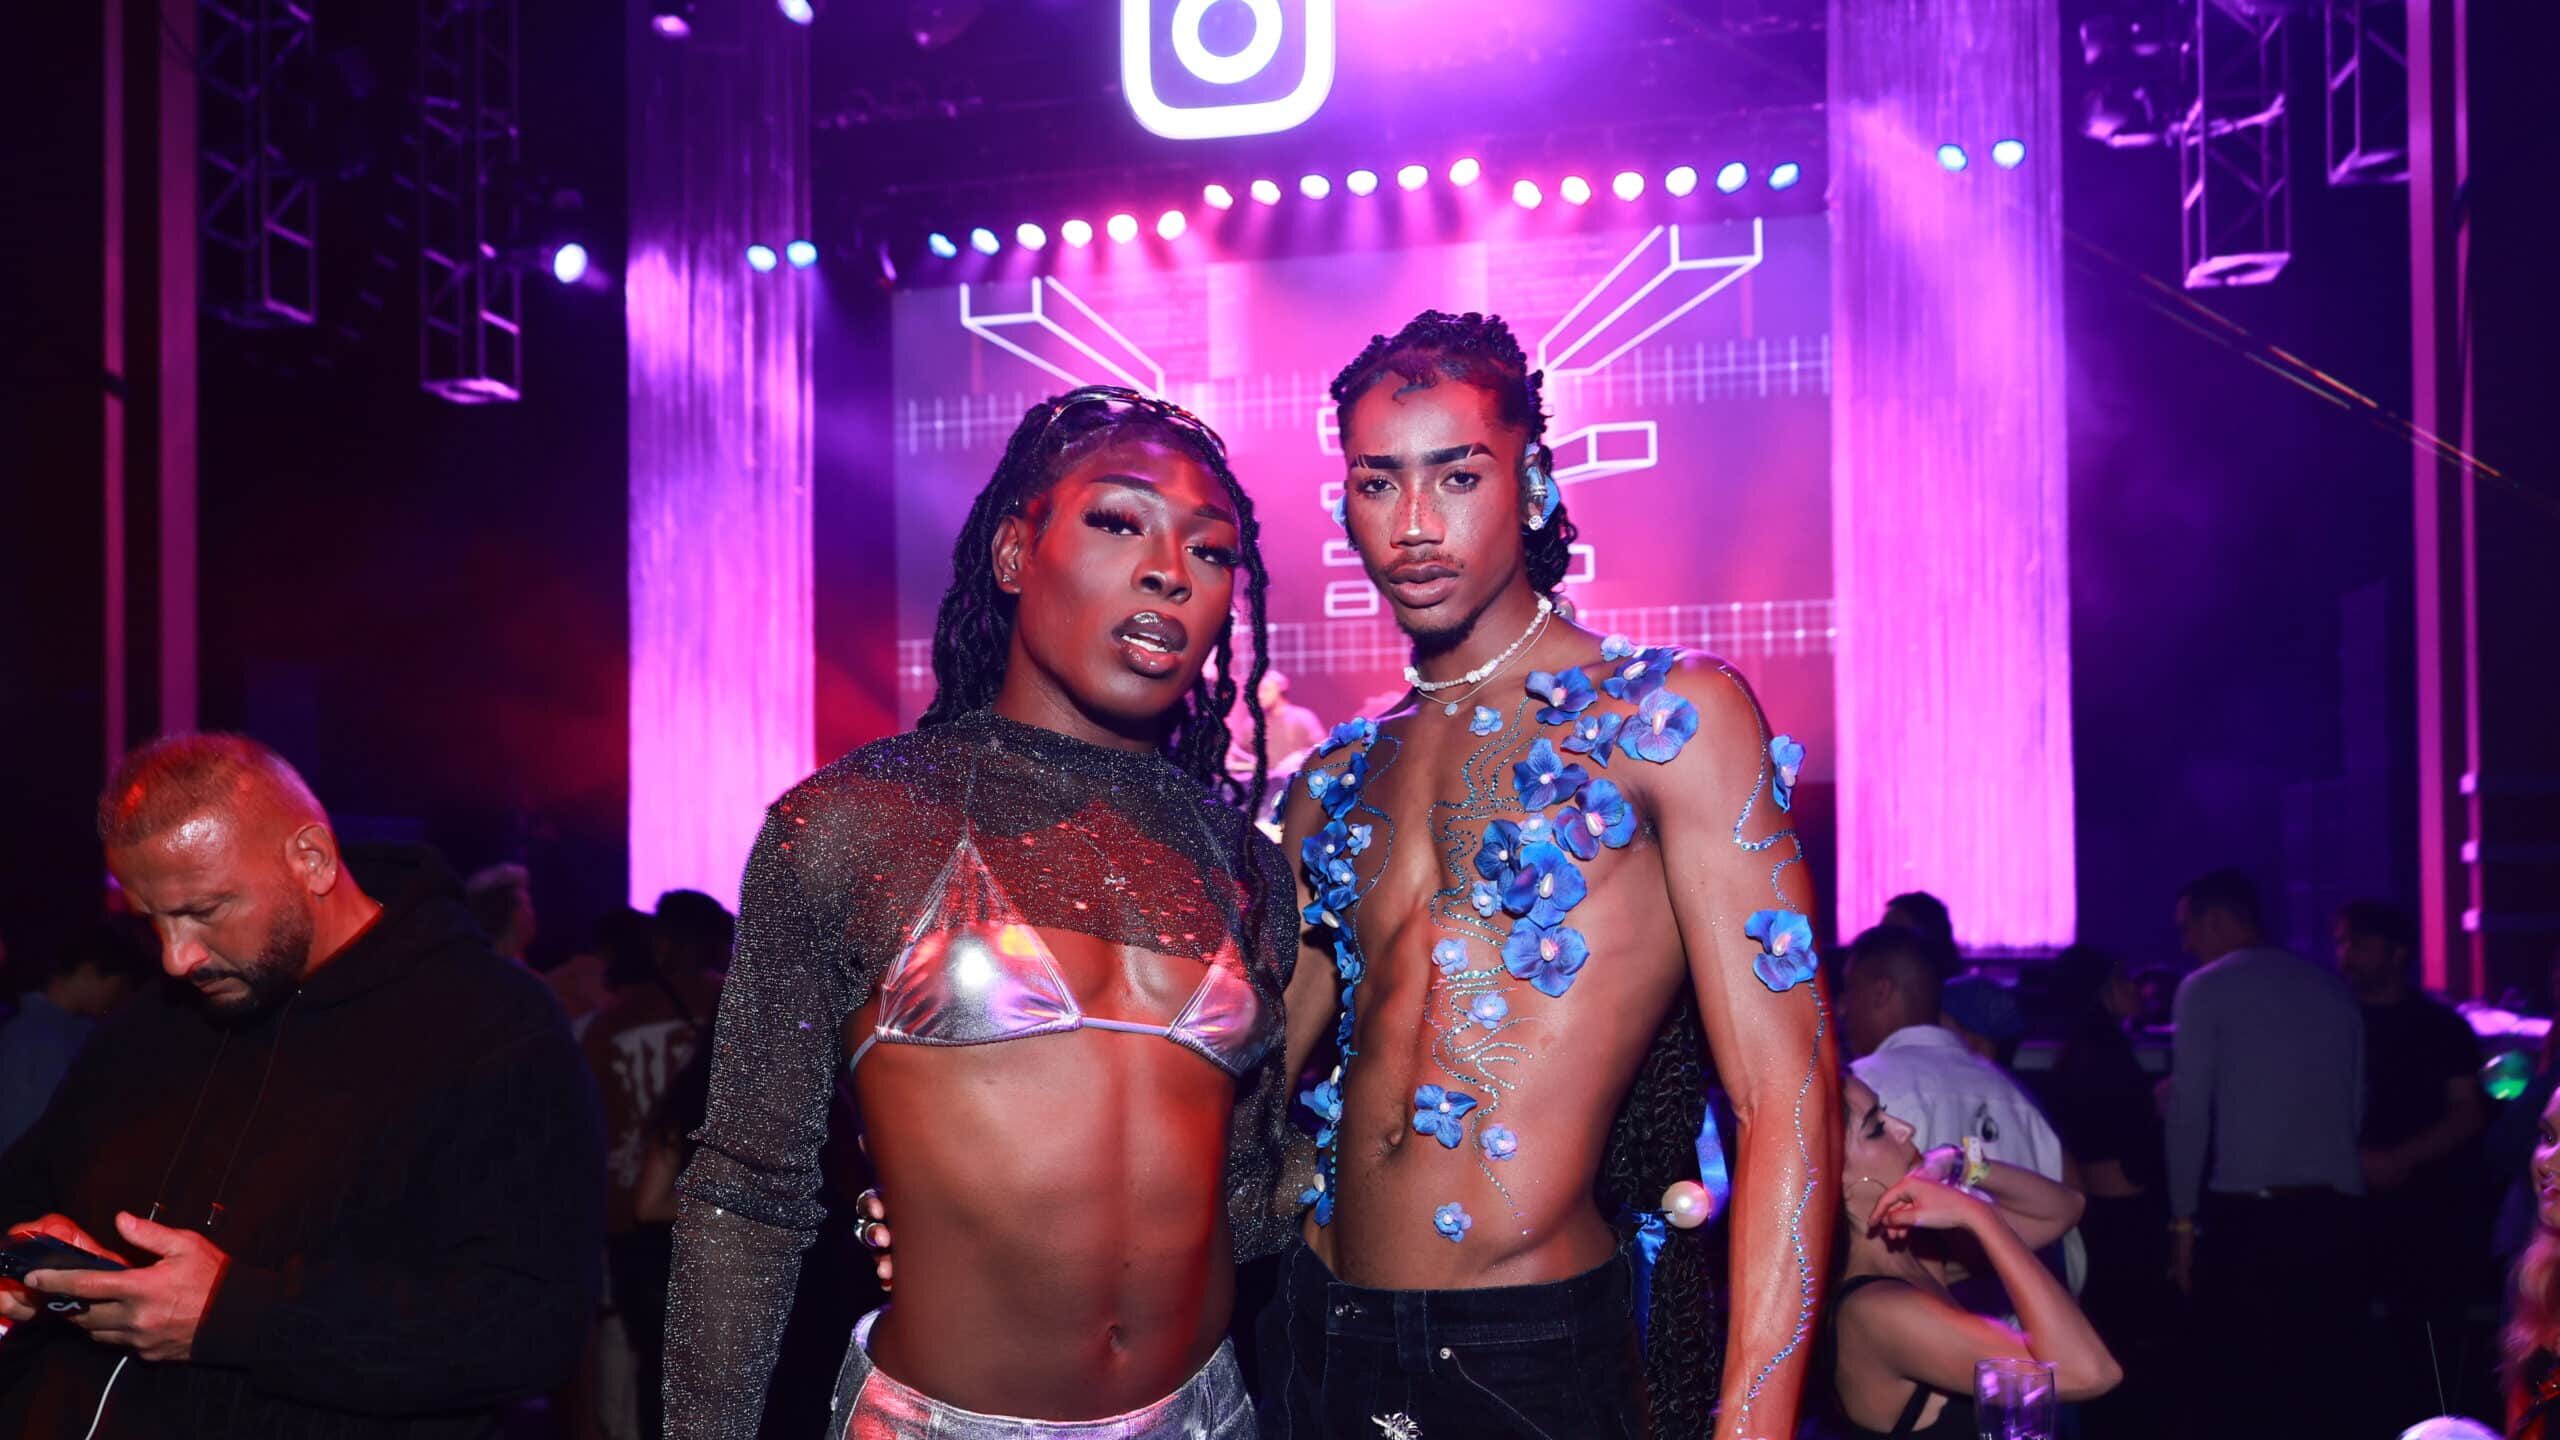 Adrian Patterson (R) and guest attend Instagram Night Out at VidCon 2023 at City National Grove of Anaheim on June 23, 2023 in Anaheim, California.